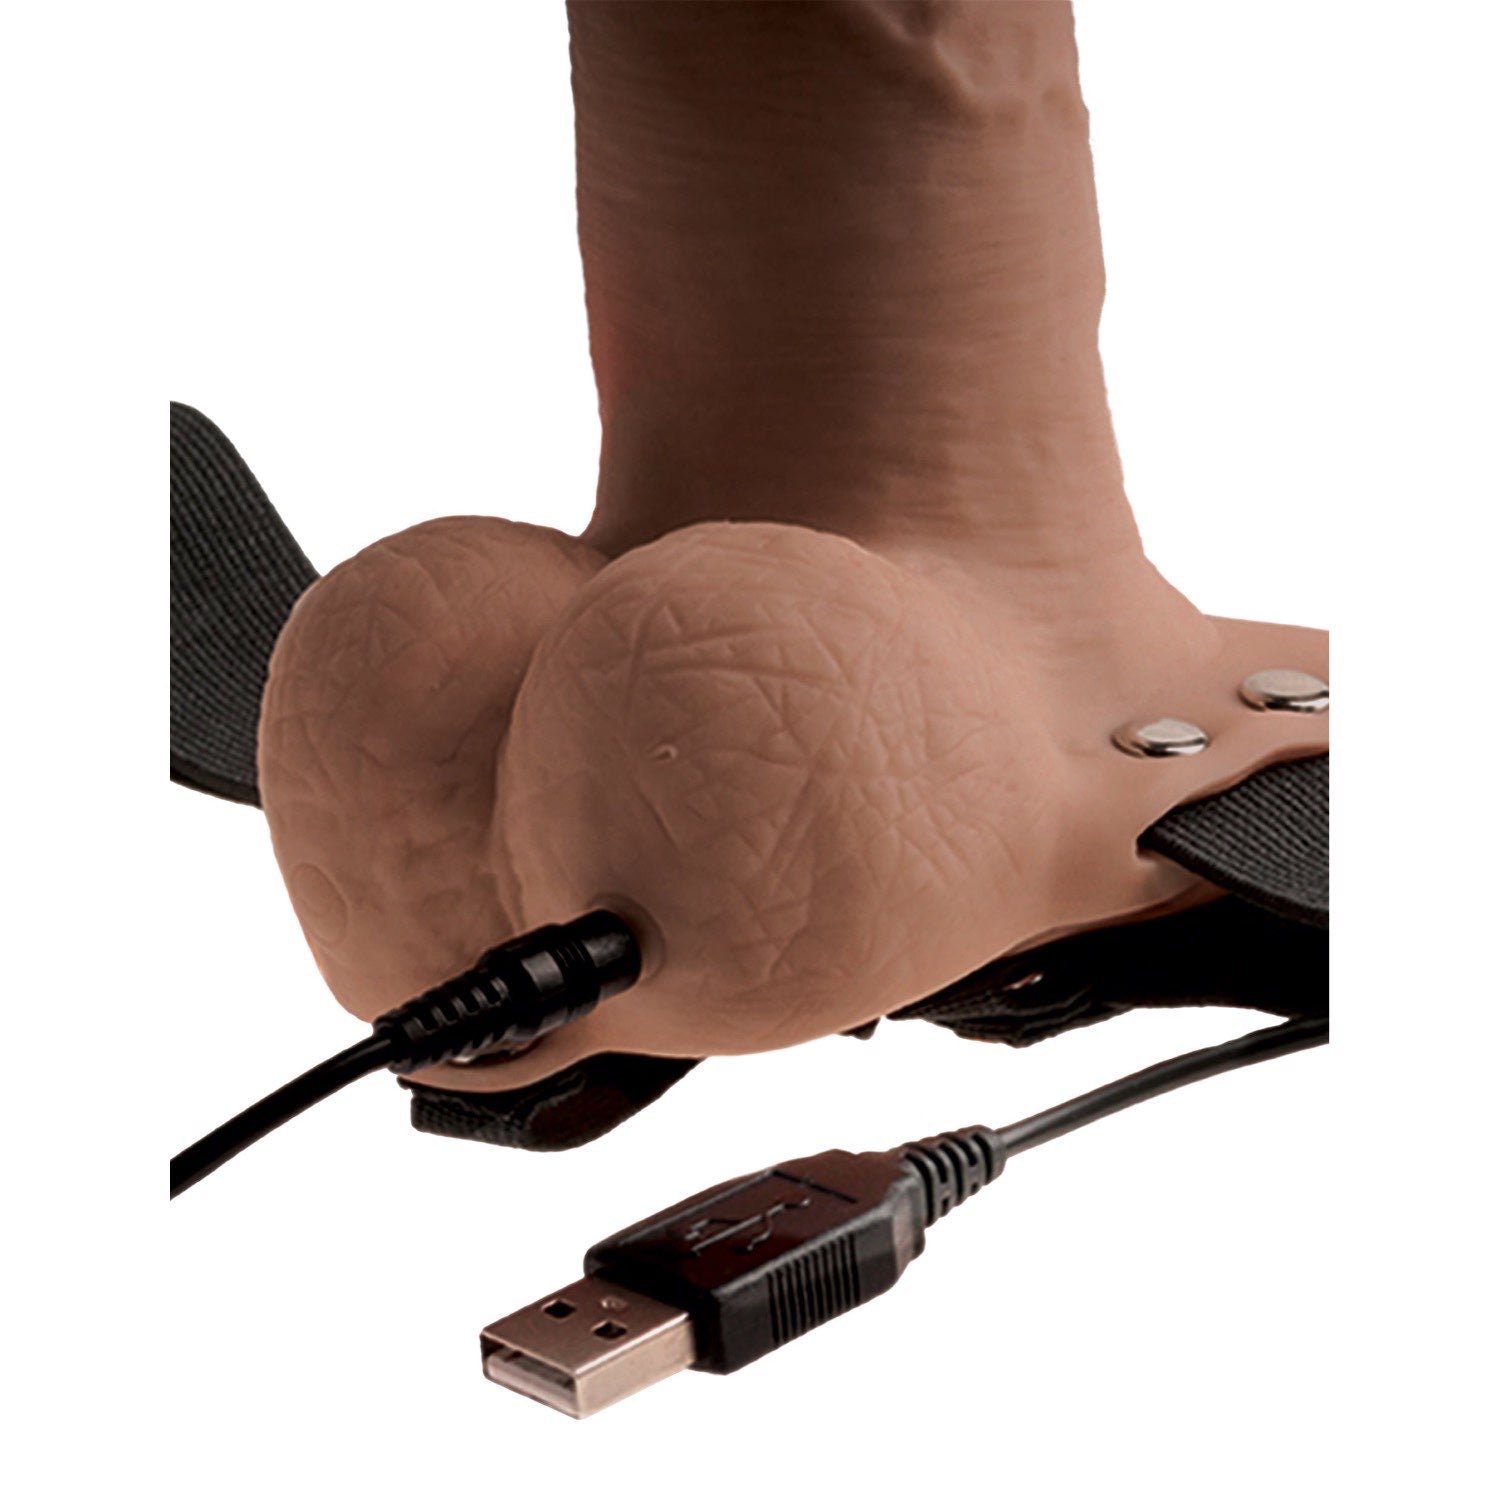 Fetish Fantasy Series 6&quot; Hollow Rechargeable Strap-On with Balls - Tan 15.2 cm Vibrating Hollow Strap-On by Pipedream